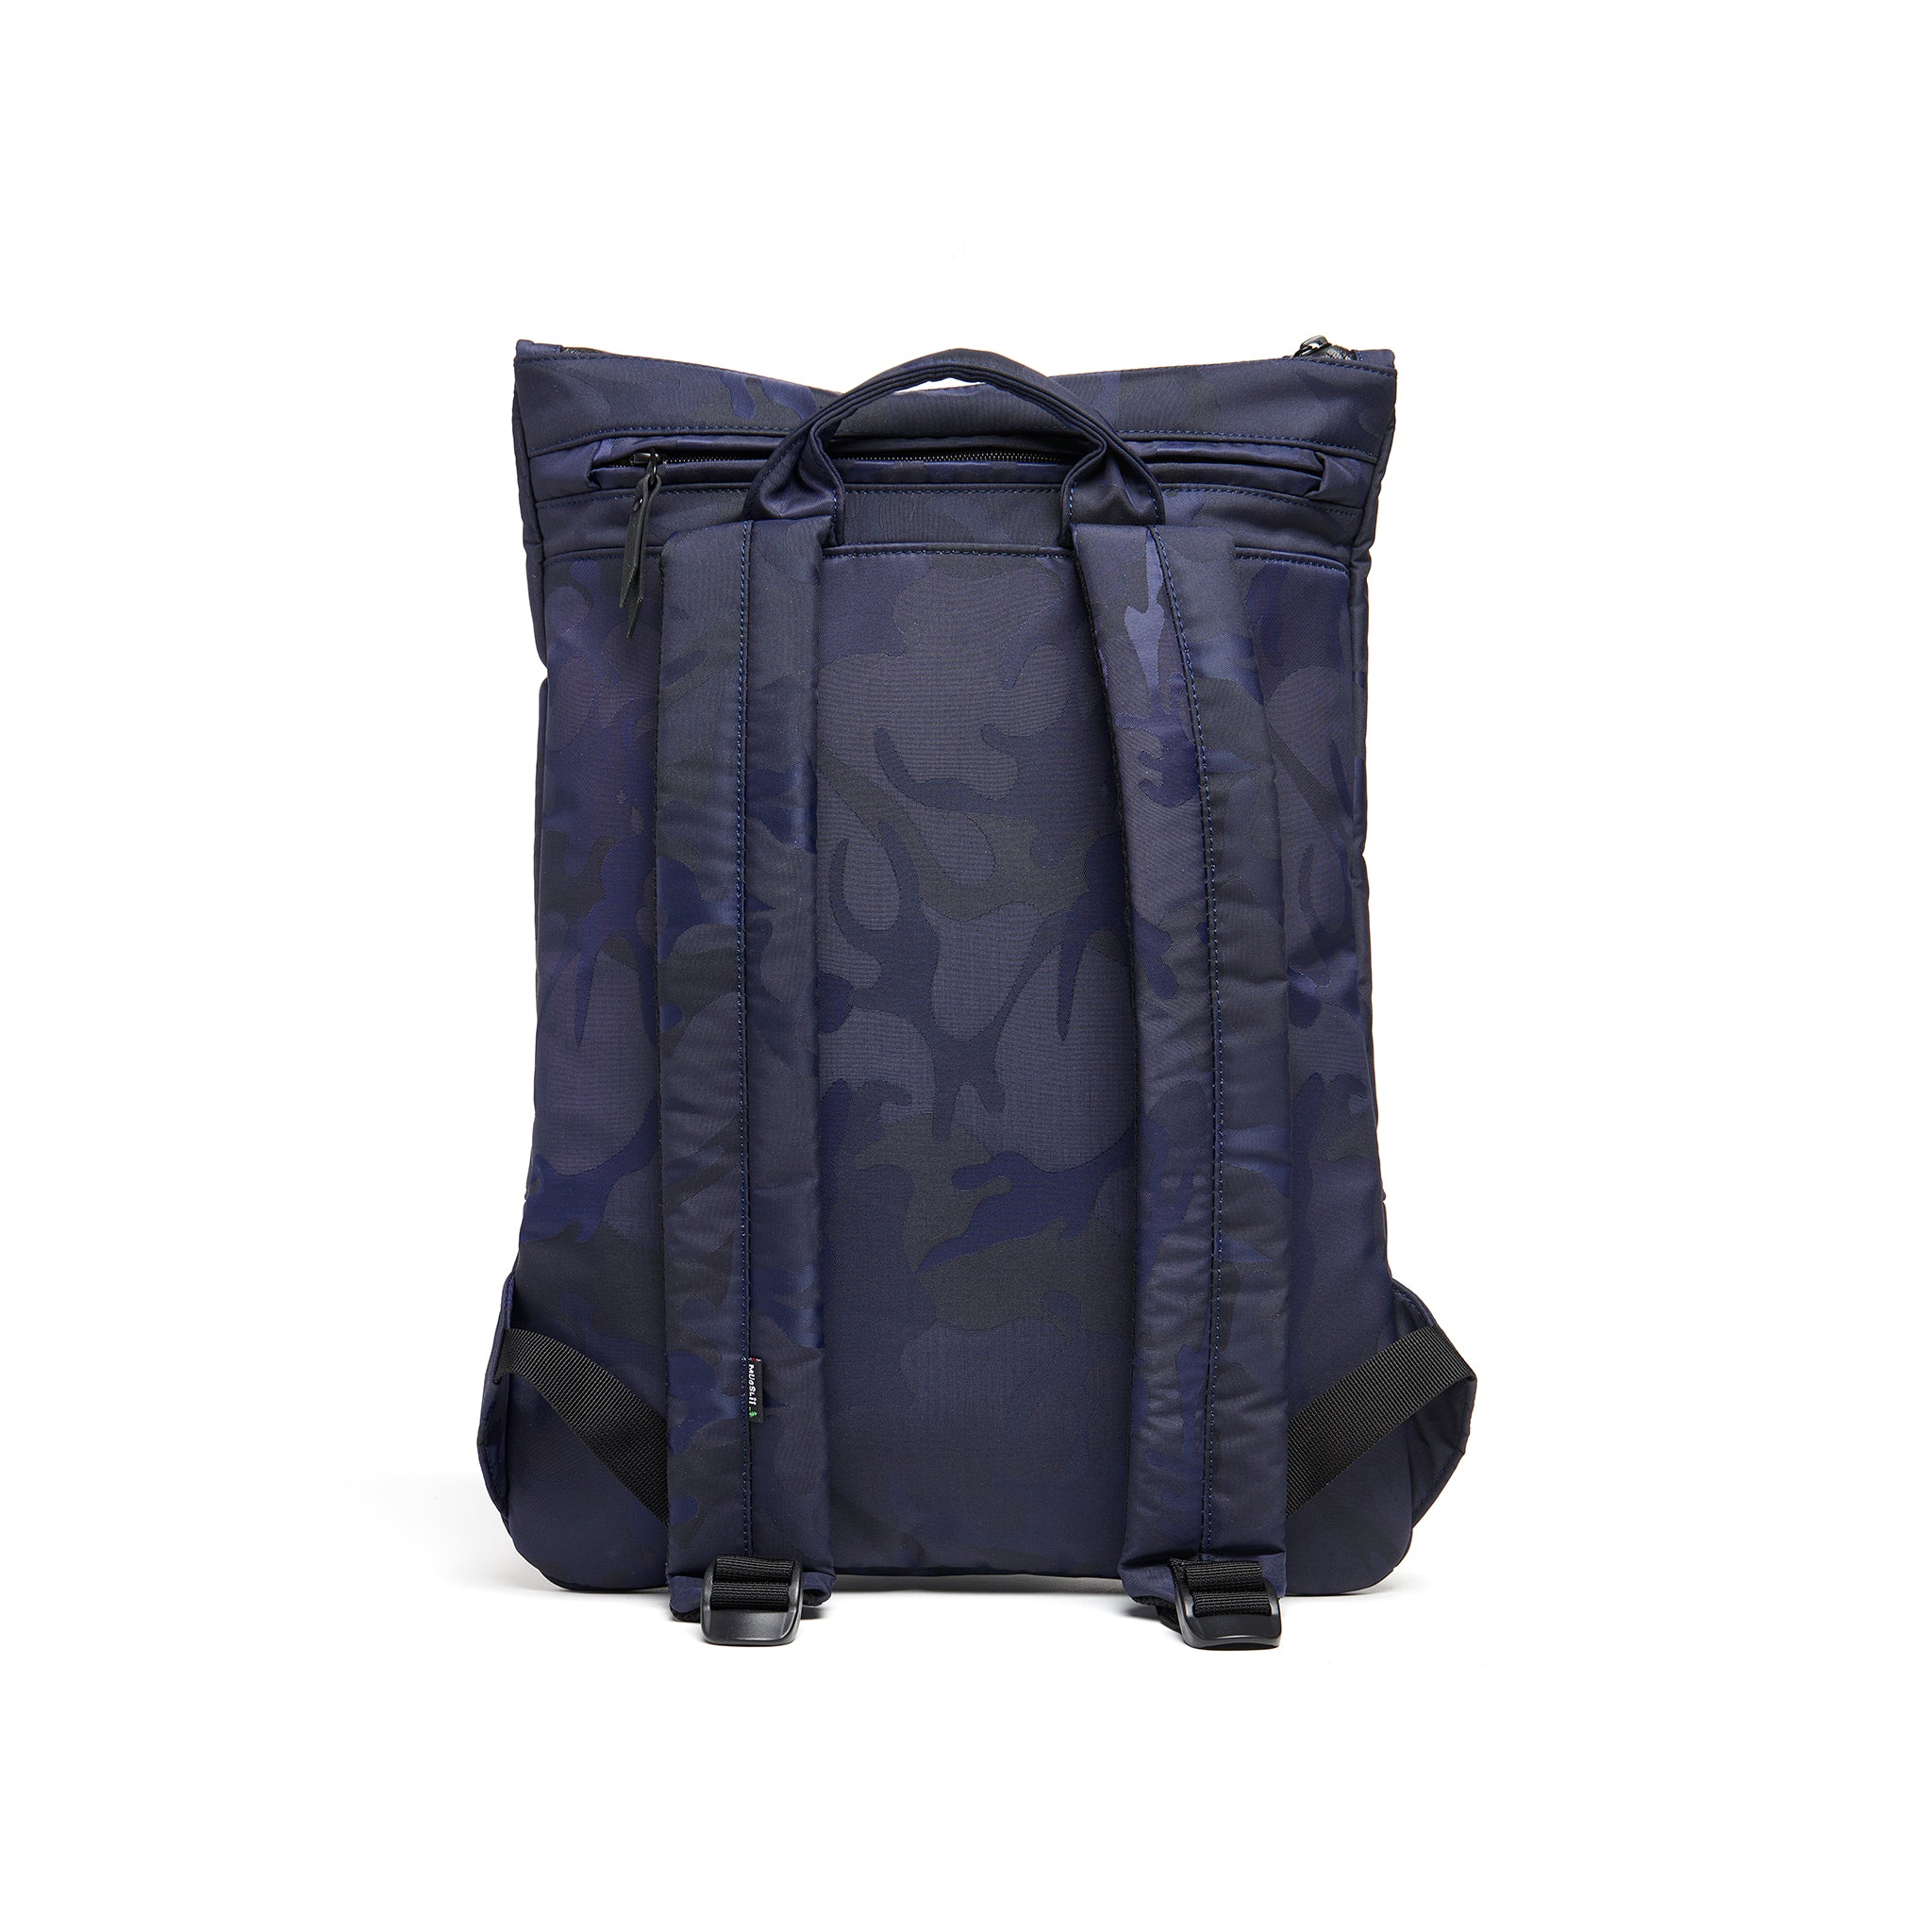 Mueslii light backpack, made of jacquard  waterproof nylon, with a laptop compartment, pattern camouflage, color blue, back view.